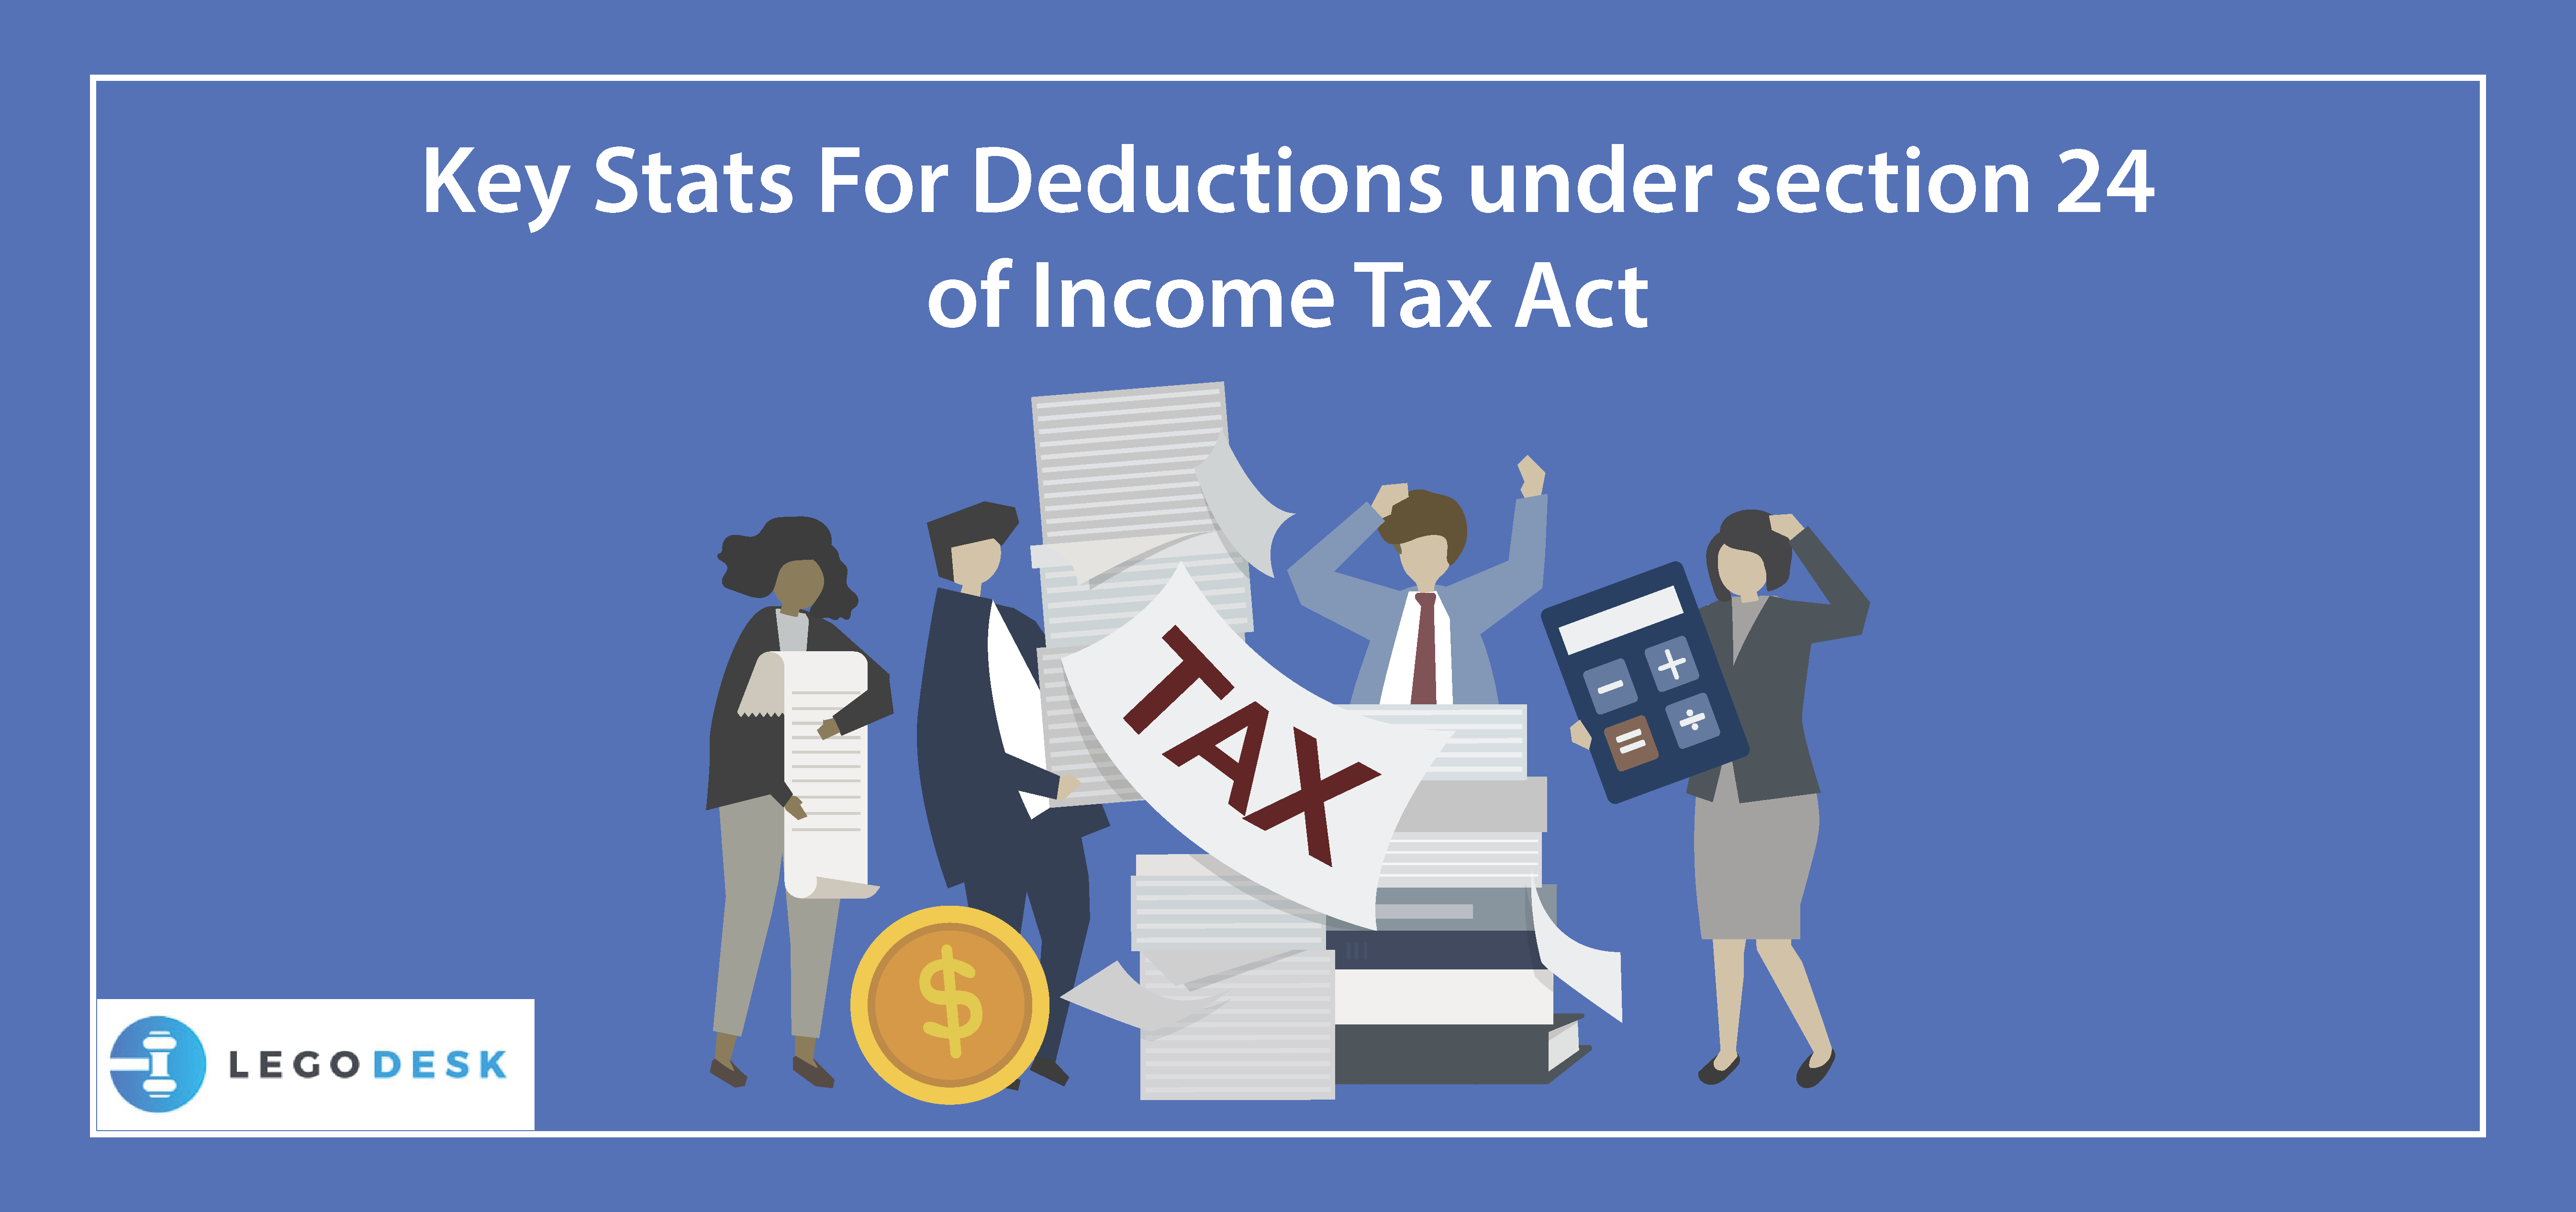 Key Stats For Deductions under section 24 of income tax act